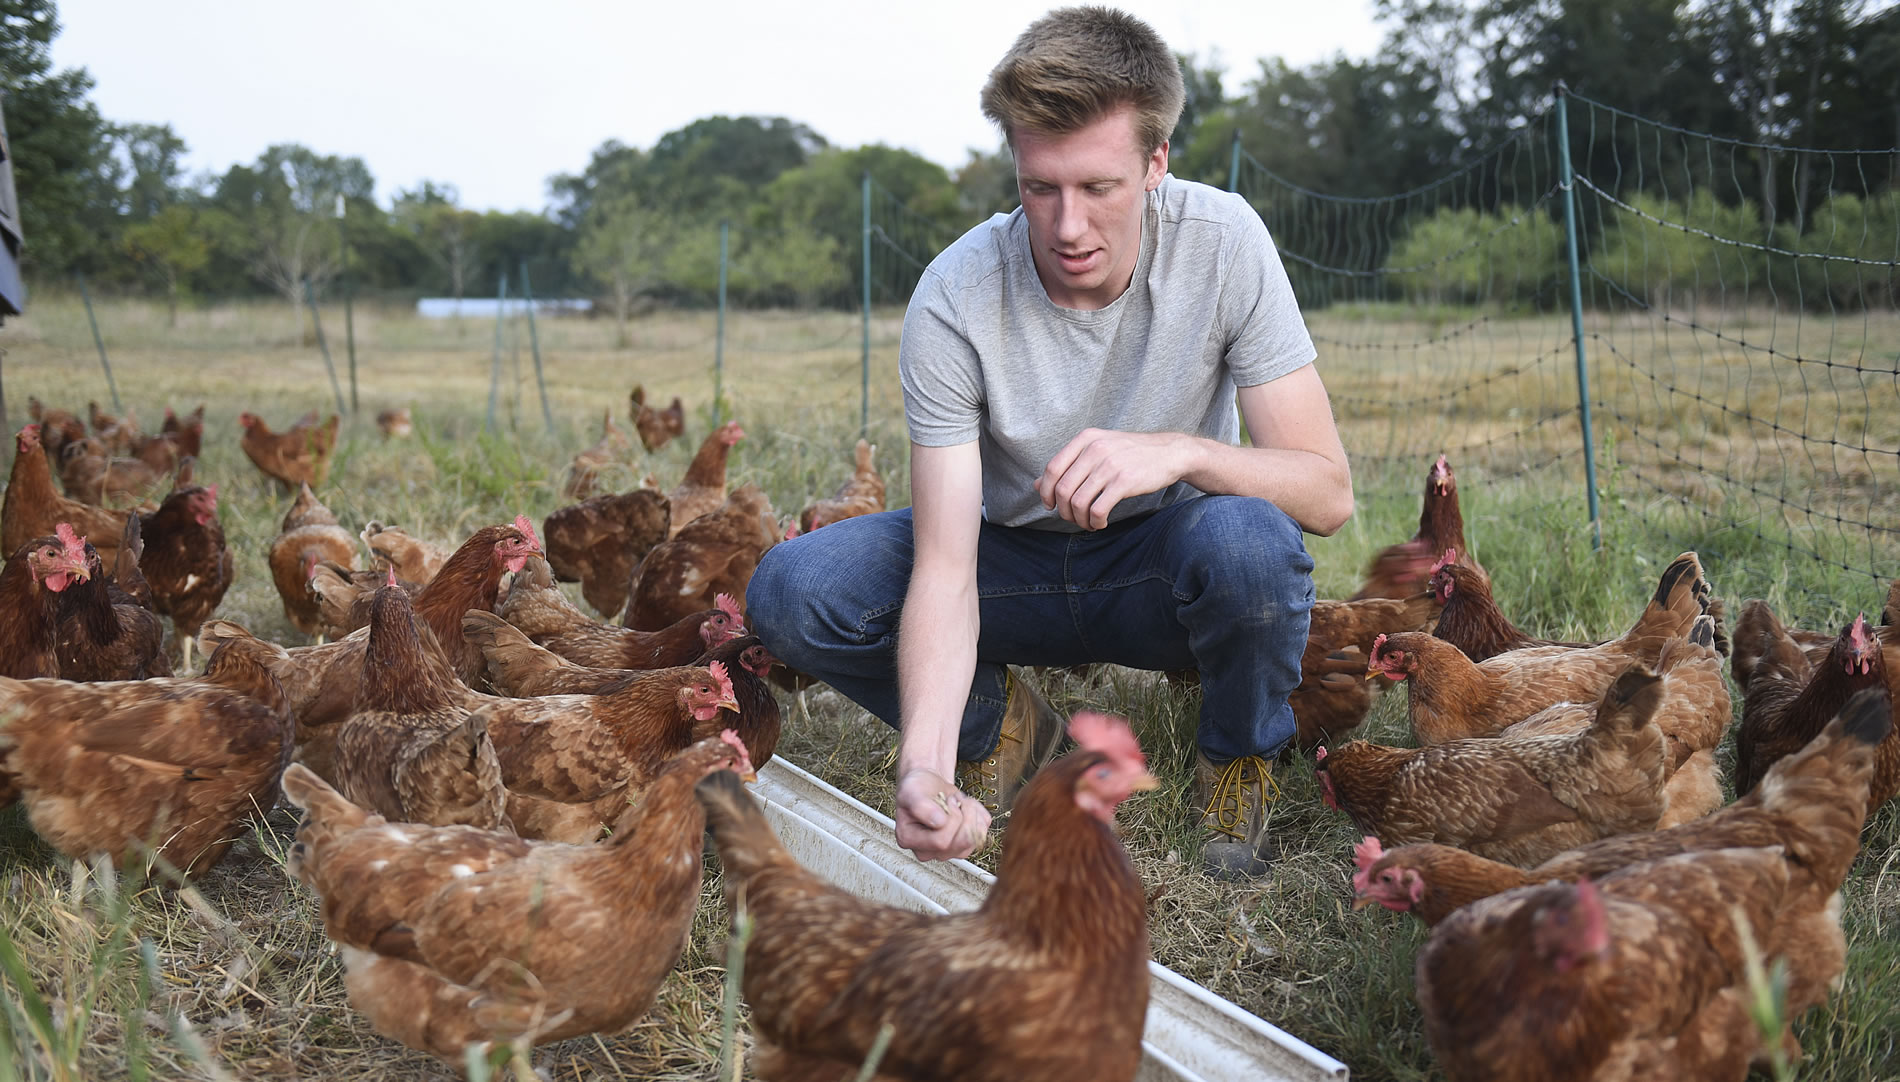             On-campus Work with Animals and Student-run Business Sets Path for Future Vet     